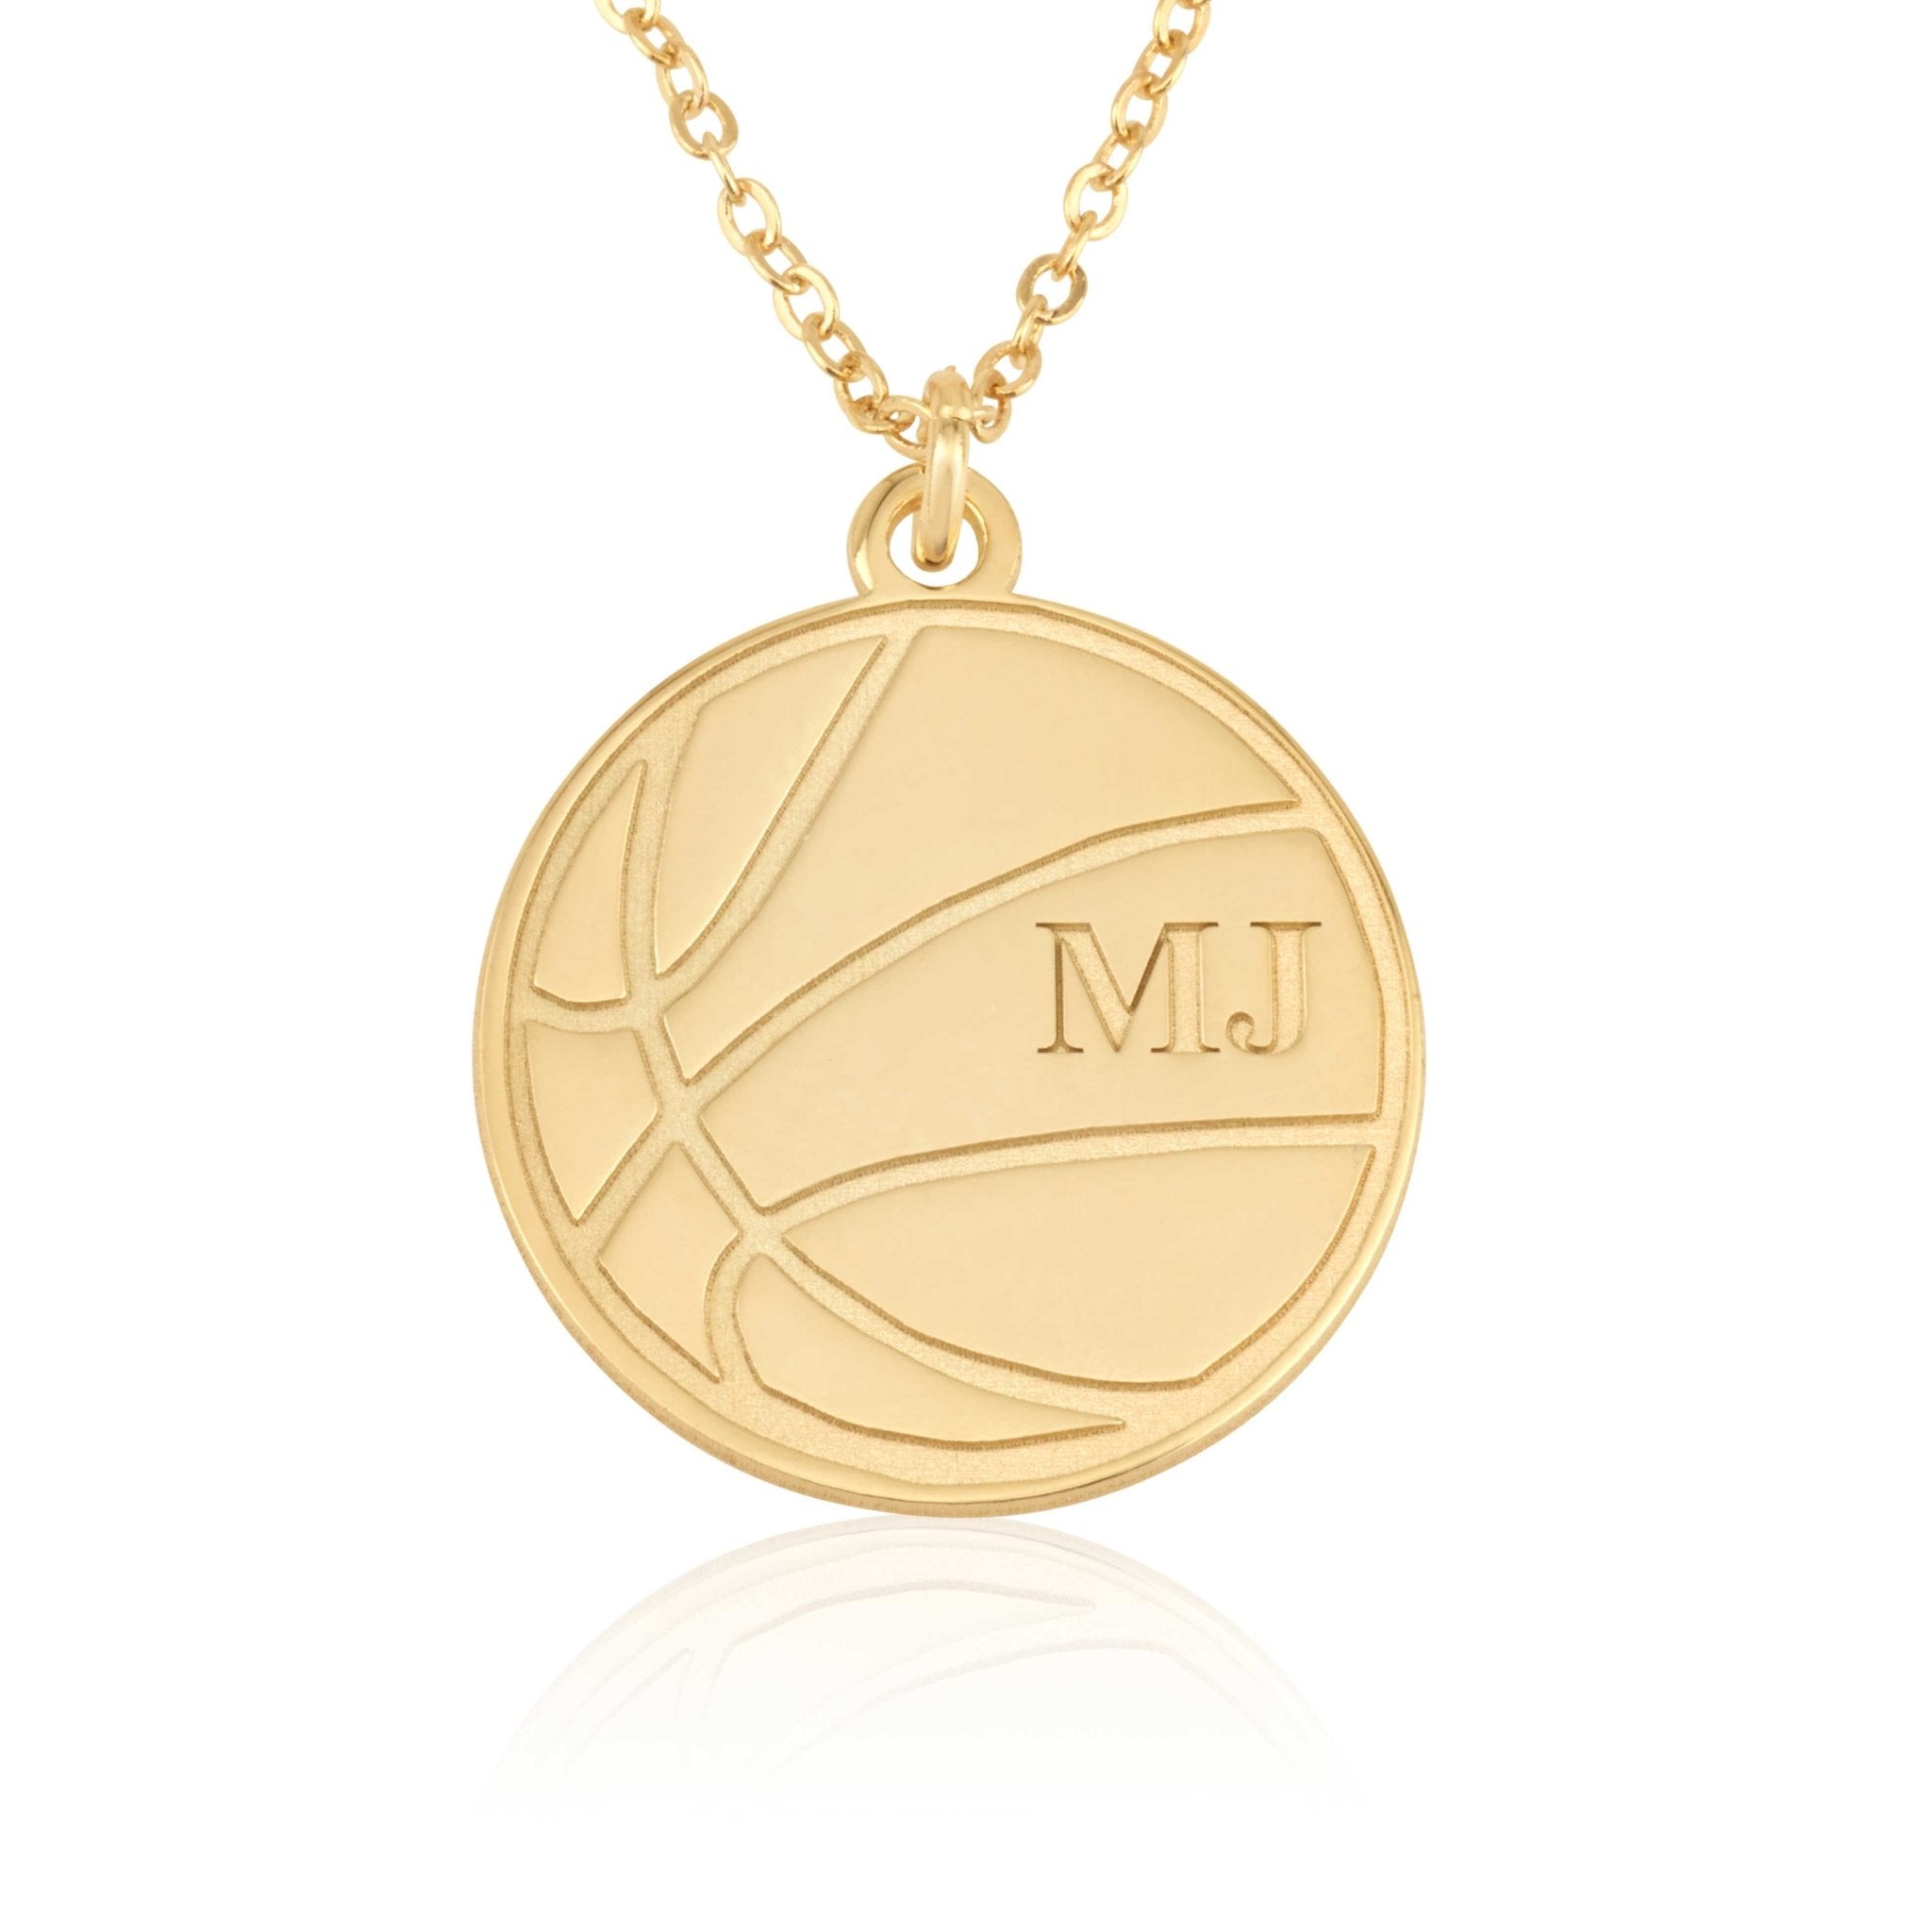 BasketBall Necklace with Name